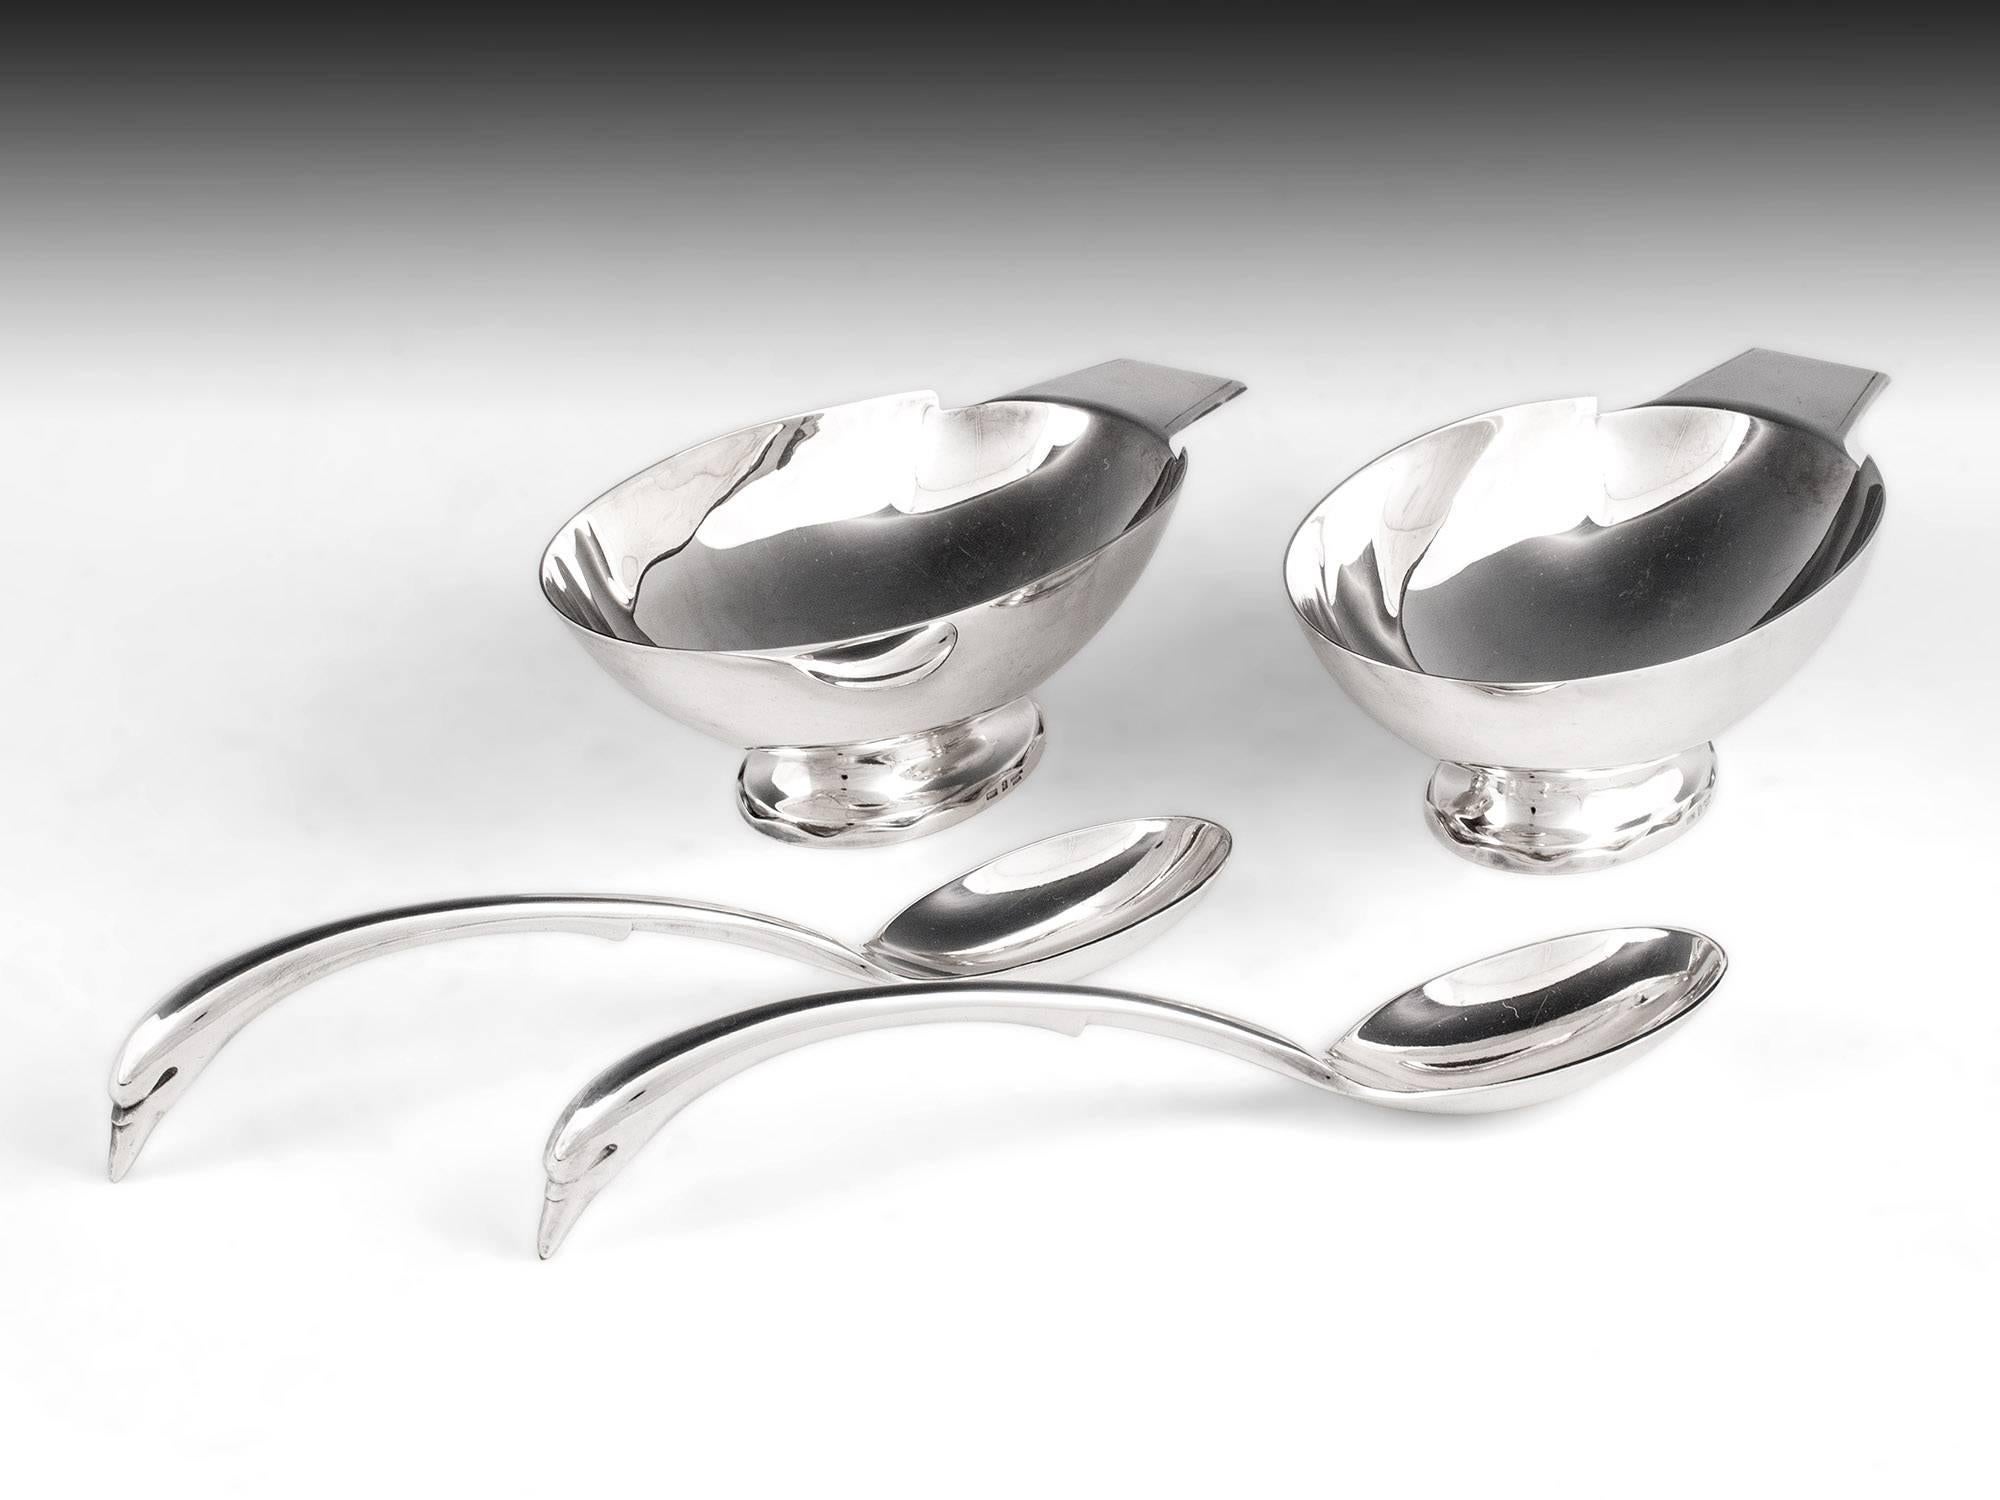 20th Century Christofle Silver Plate Swan Sauce Boats by Christian Fjerdingstad